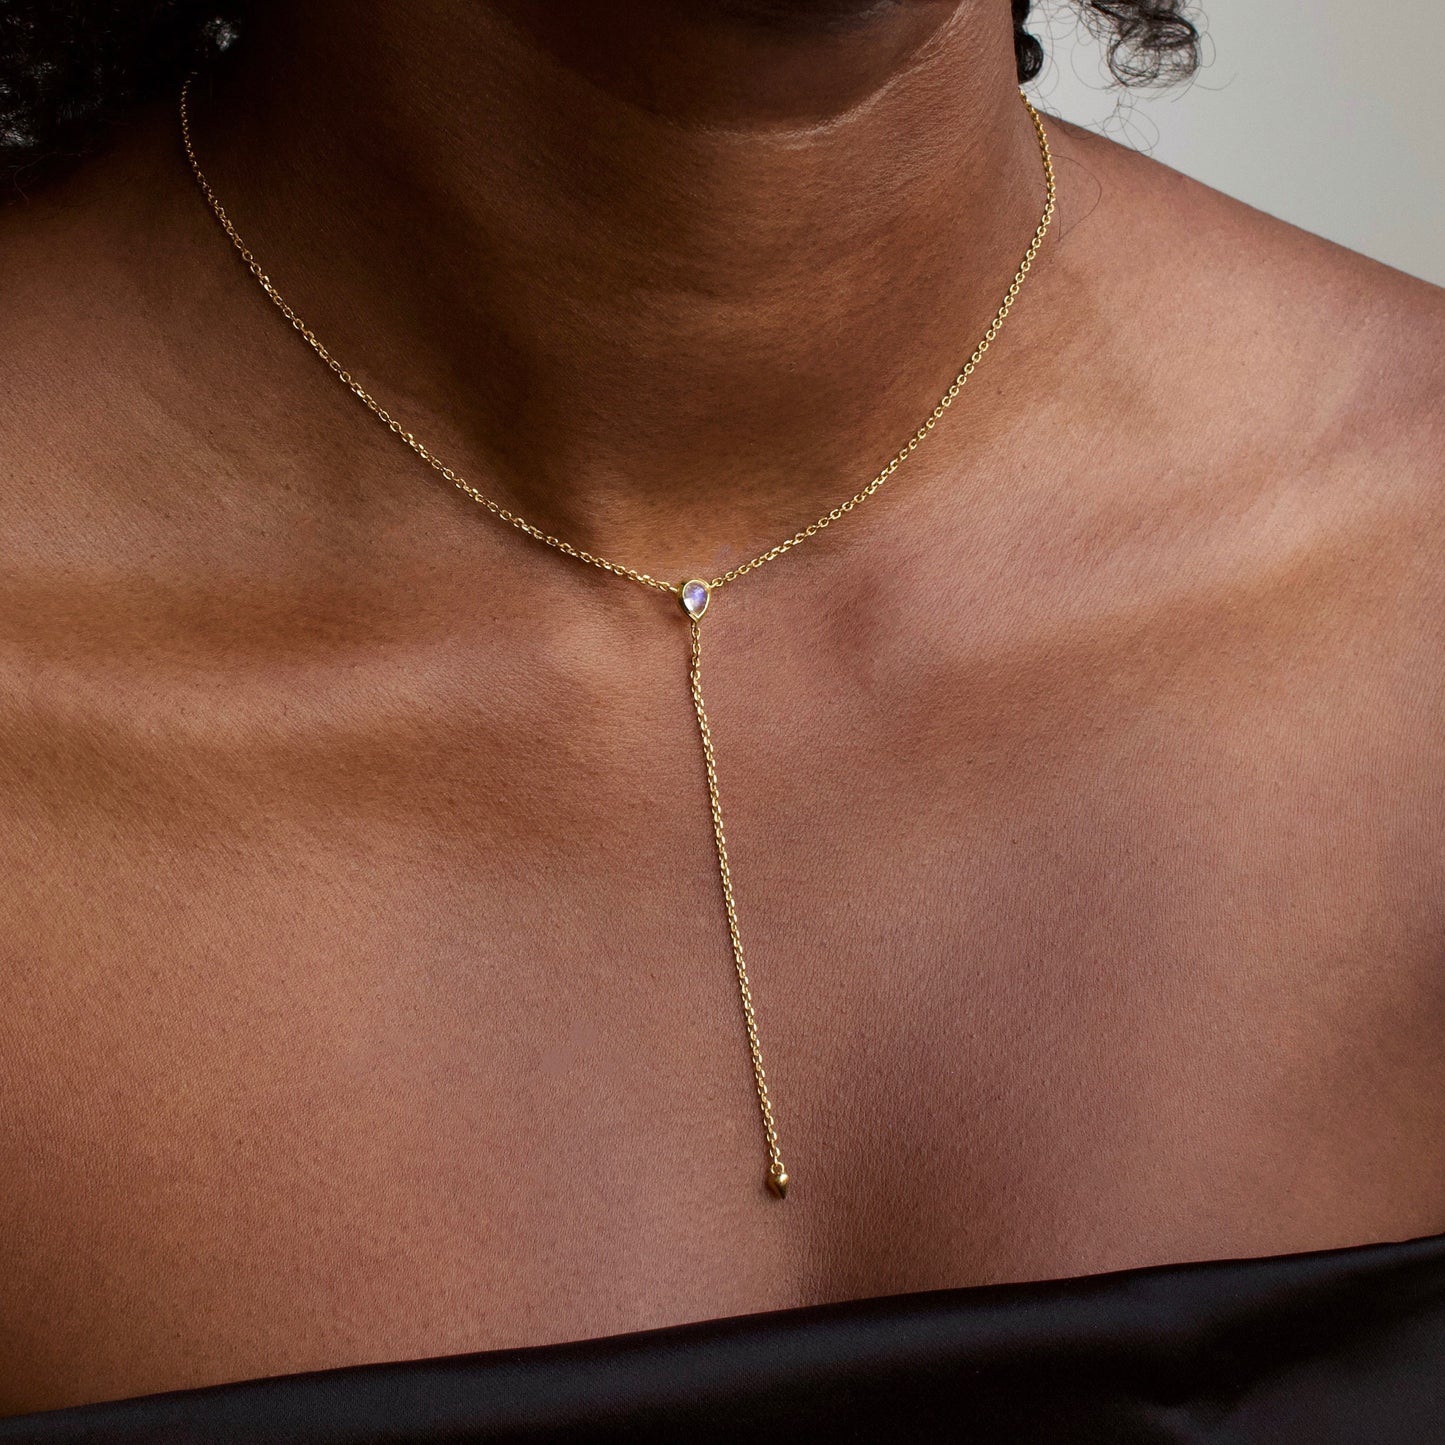 moonstone lariat necklace in gold